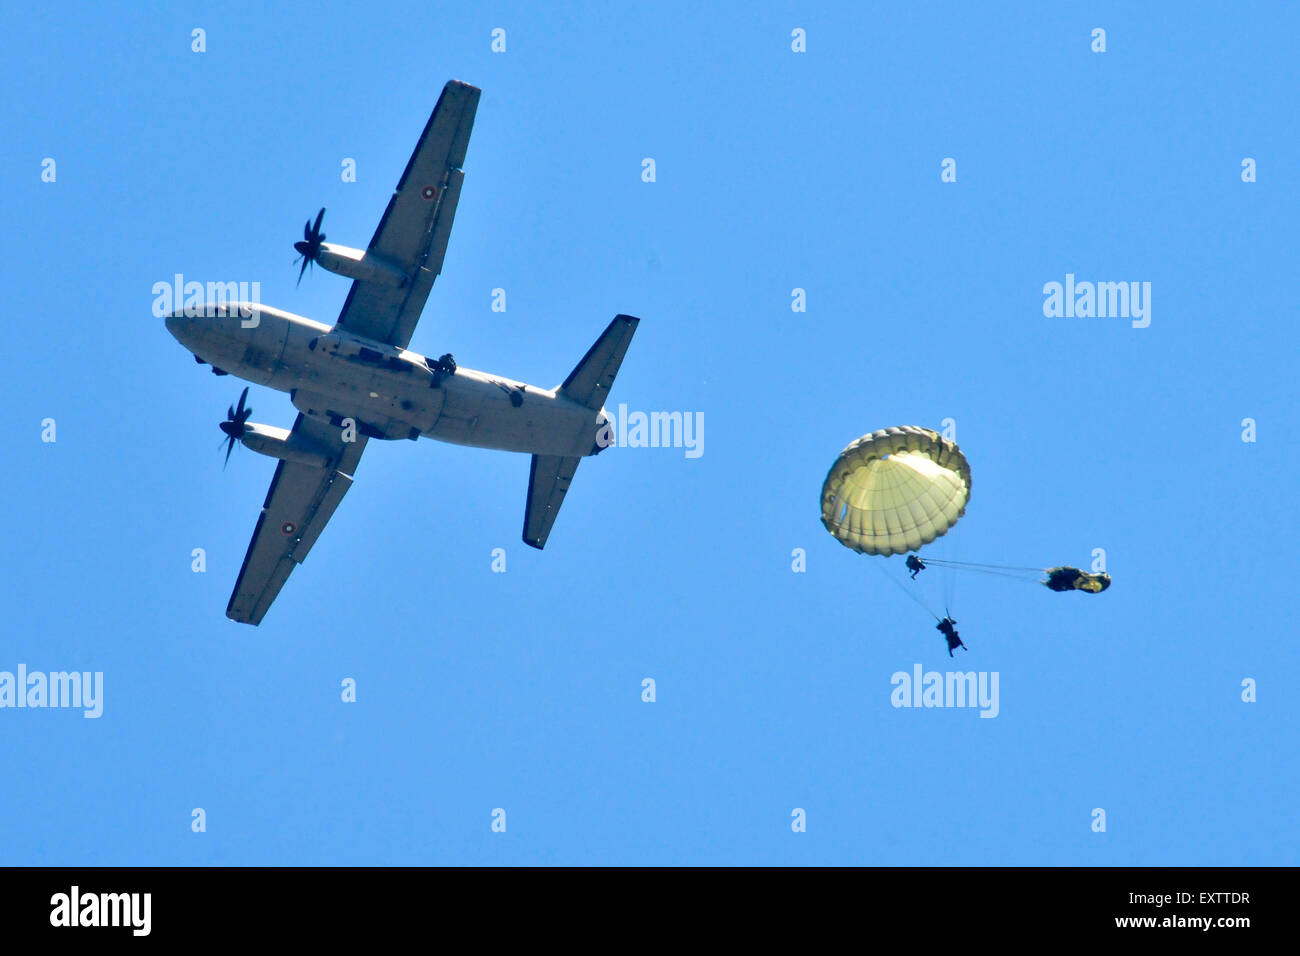 Plovdiv, Bulgaria. 16th July, 2015. A Bulgarian transport aircraft C-27J Spartan and Bulgarian paratroopers participate in the joint Bulgarian-U.S. military exercise at Krumovo Airbase, near Plovdiv, Bulgaria, on July 16, 2015. More than 120 paratroopers jumped at the Open Day of the joint Bulgarian-U.S. military exercise 'Thracian summer 2015' on Thursday near Plovdiv. Credit:  Wang Xinran/Xinhua/Alamy Live News Stock Photo